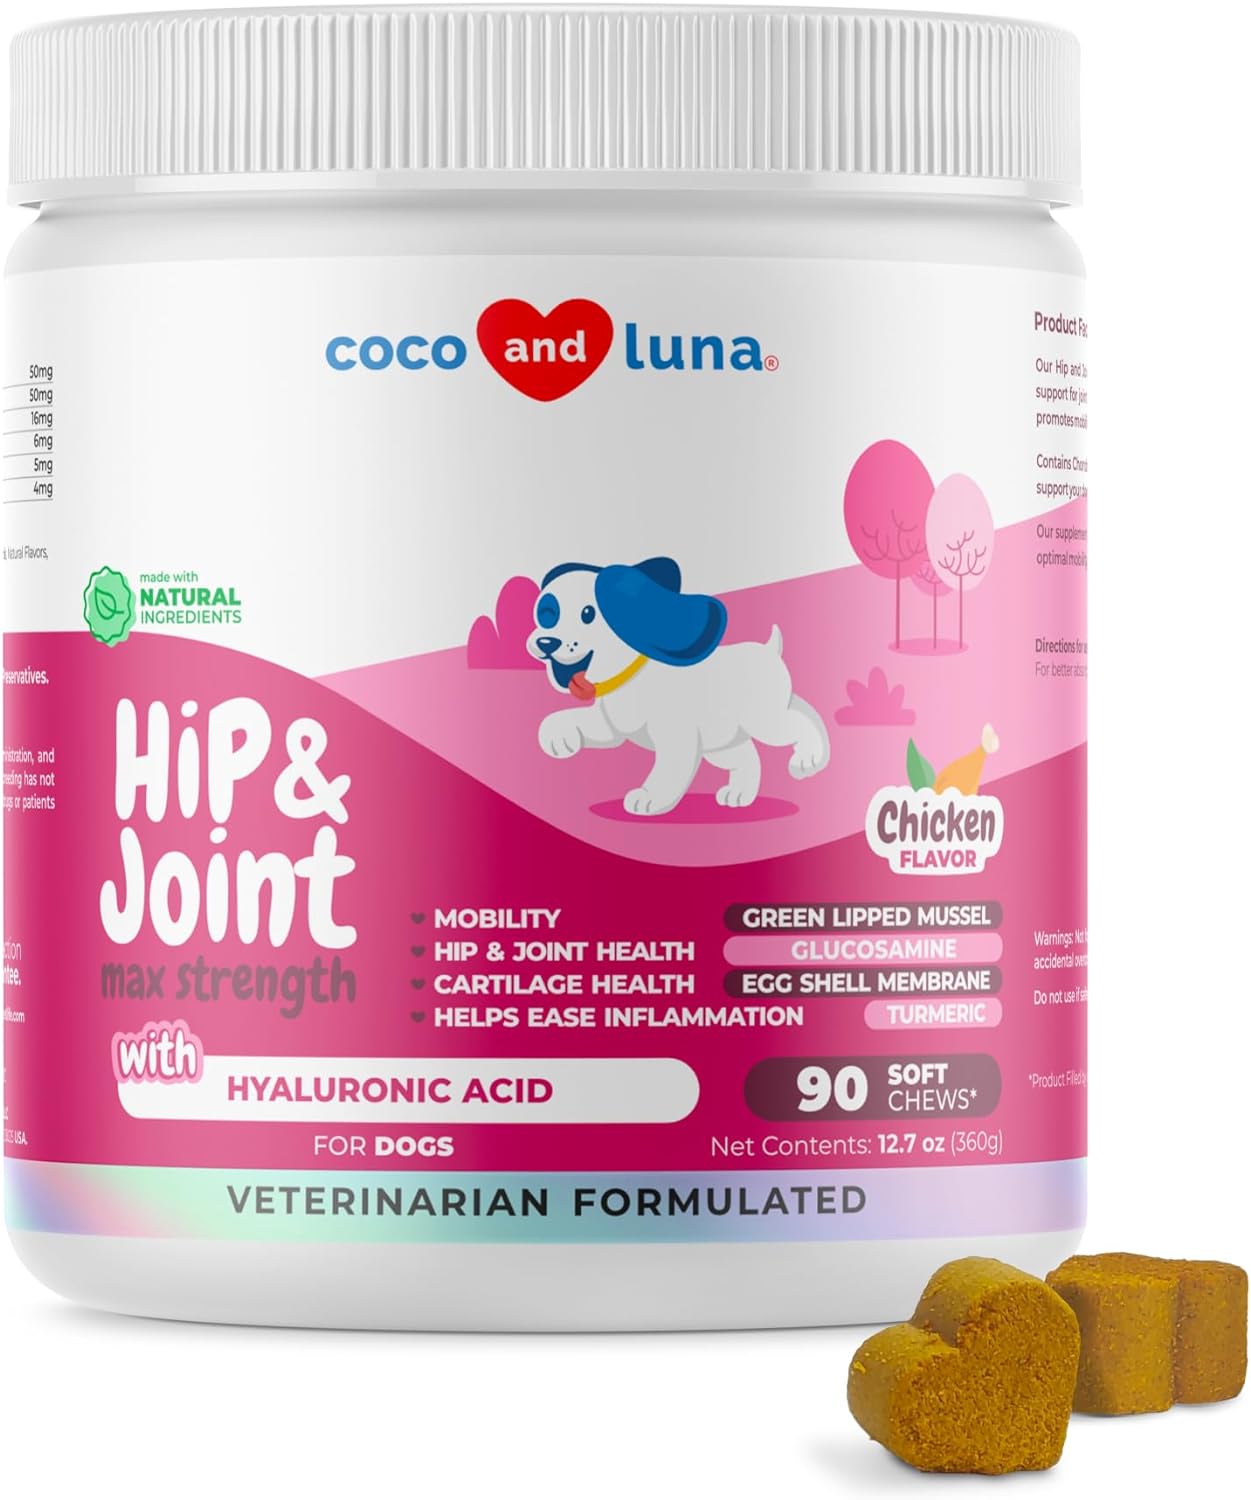 Joint Supplement for Dogs - 90 Soft Chews - with Green Lipped Mussel, Glucosamine, Turmeric, Fish Oil, MSM and Yucca Schidigera (Soft Chews Max Strength)